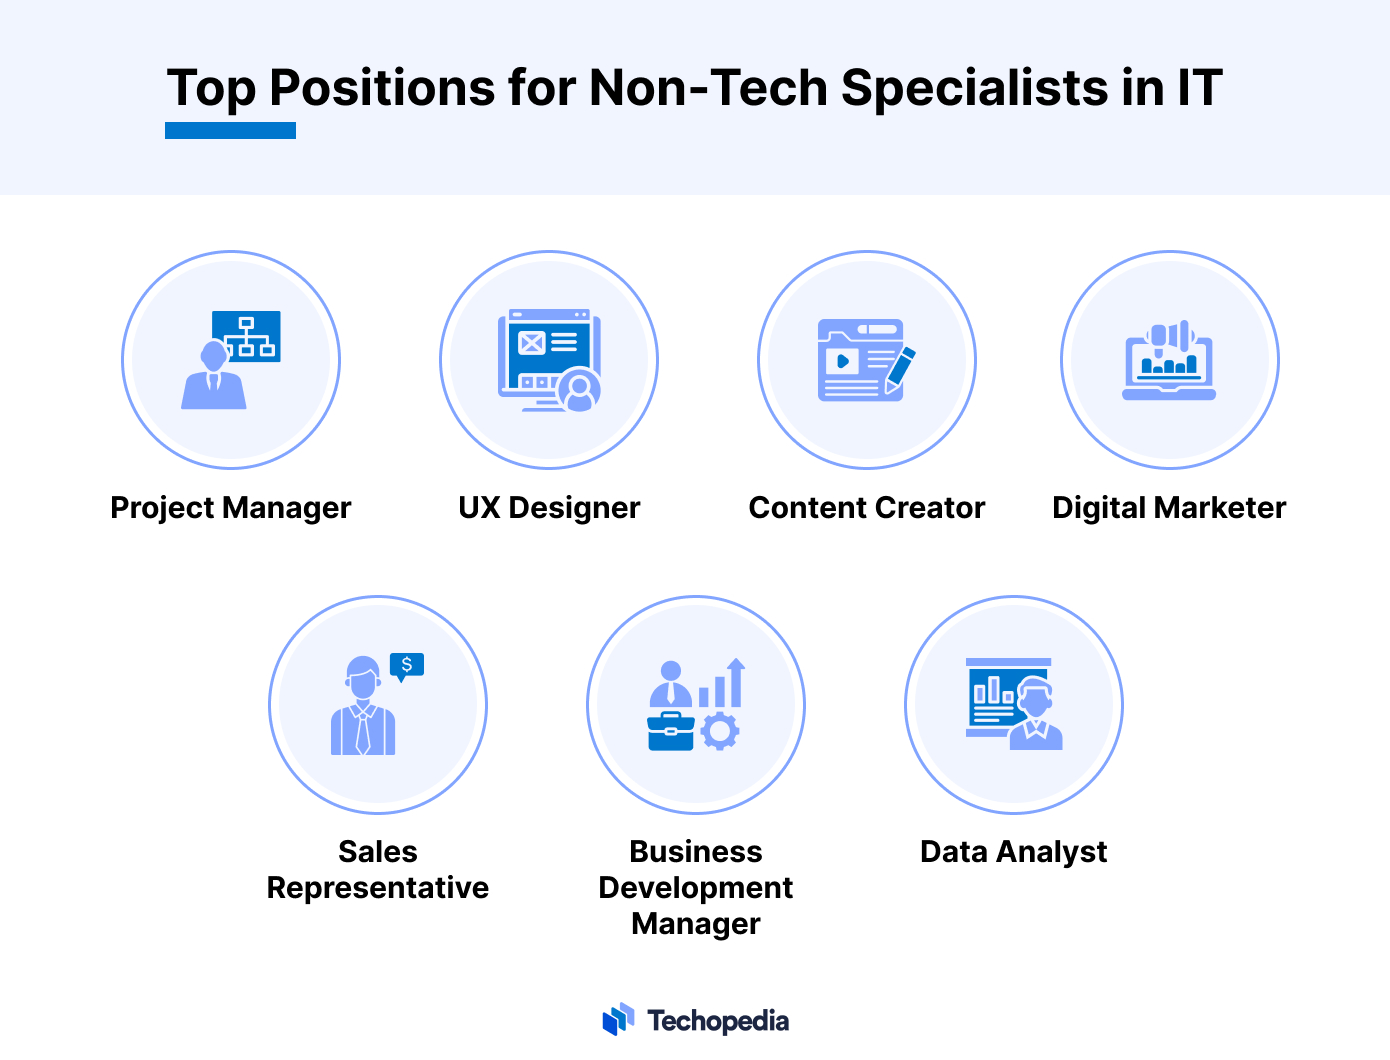 An infographic showing the top positions for non-tech specialists in IT